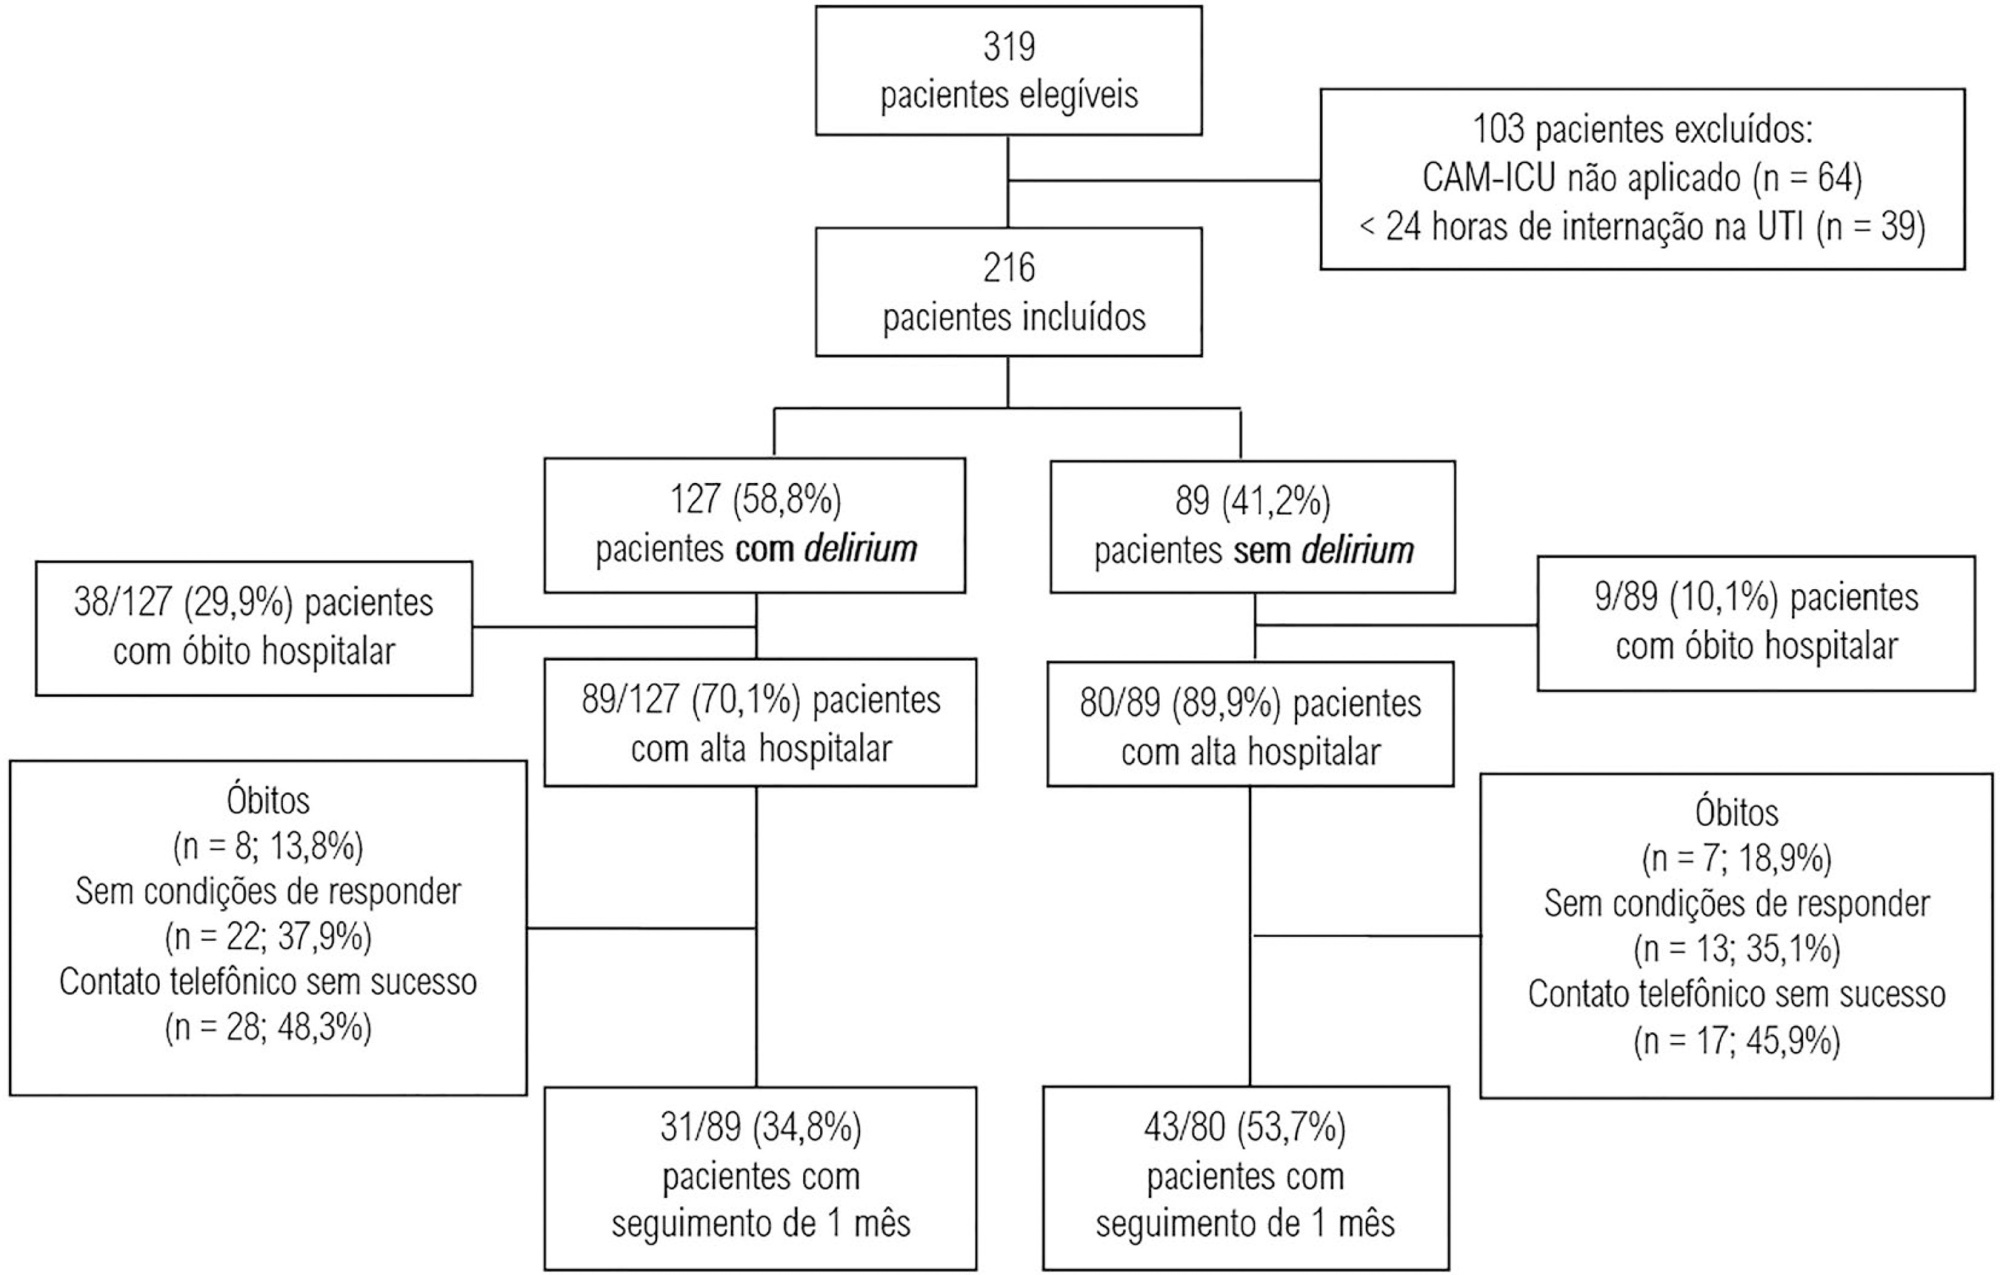 Delirium and quality of life in critically ill patients: a prospective cohort study